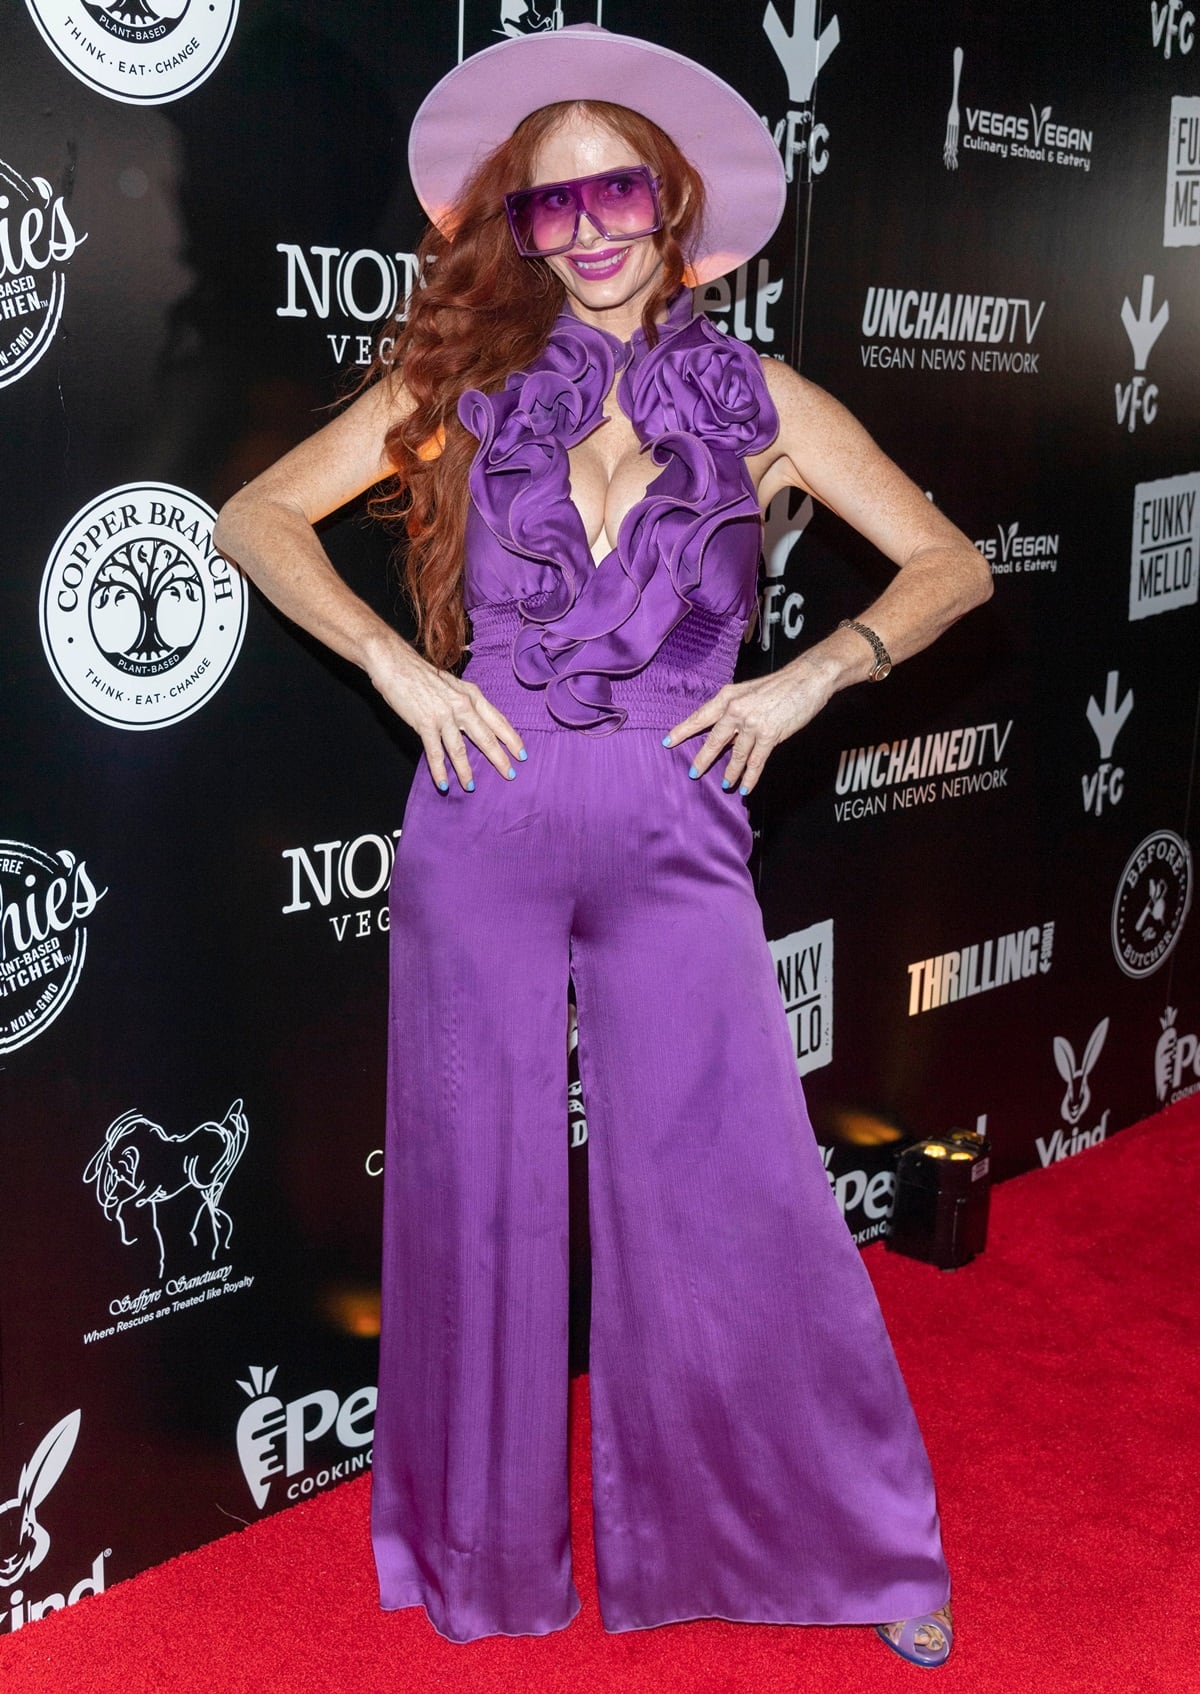 Phoebe Price graced the Los Angeles Premiere of the TV Show "Peeled" at the Directors Guild of America in Hollywood